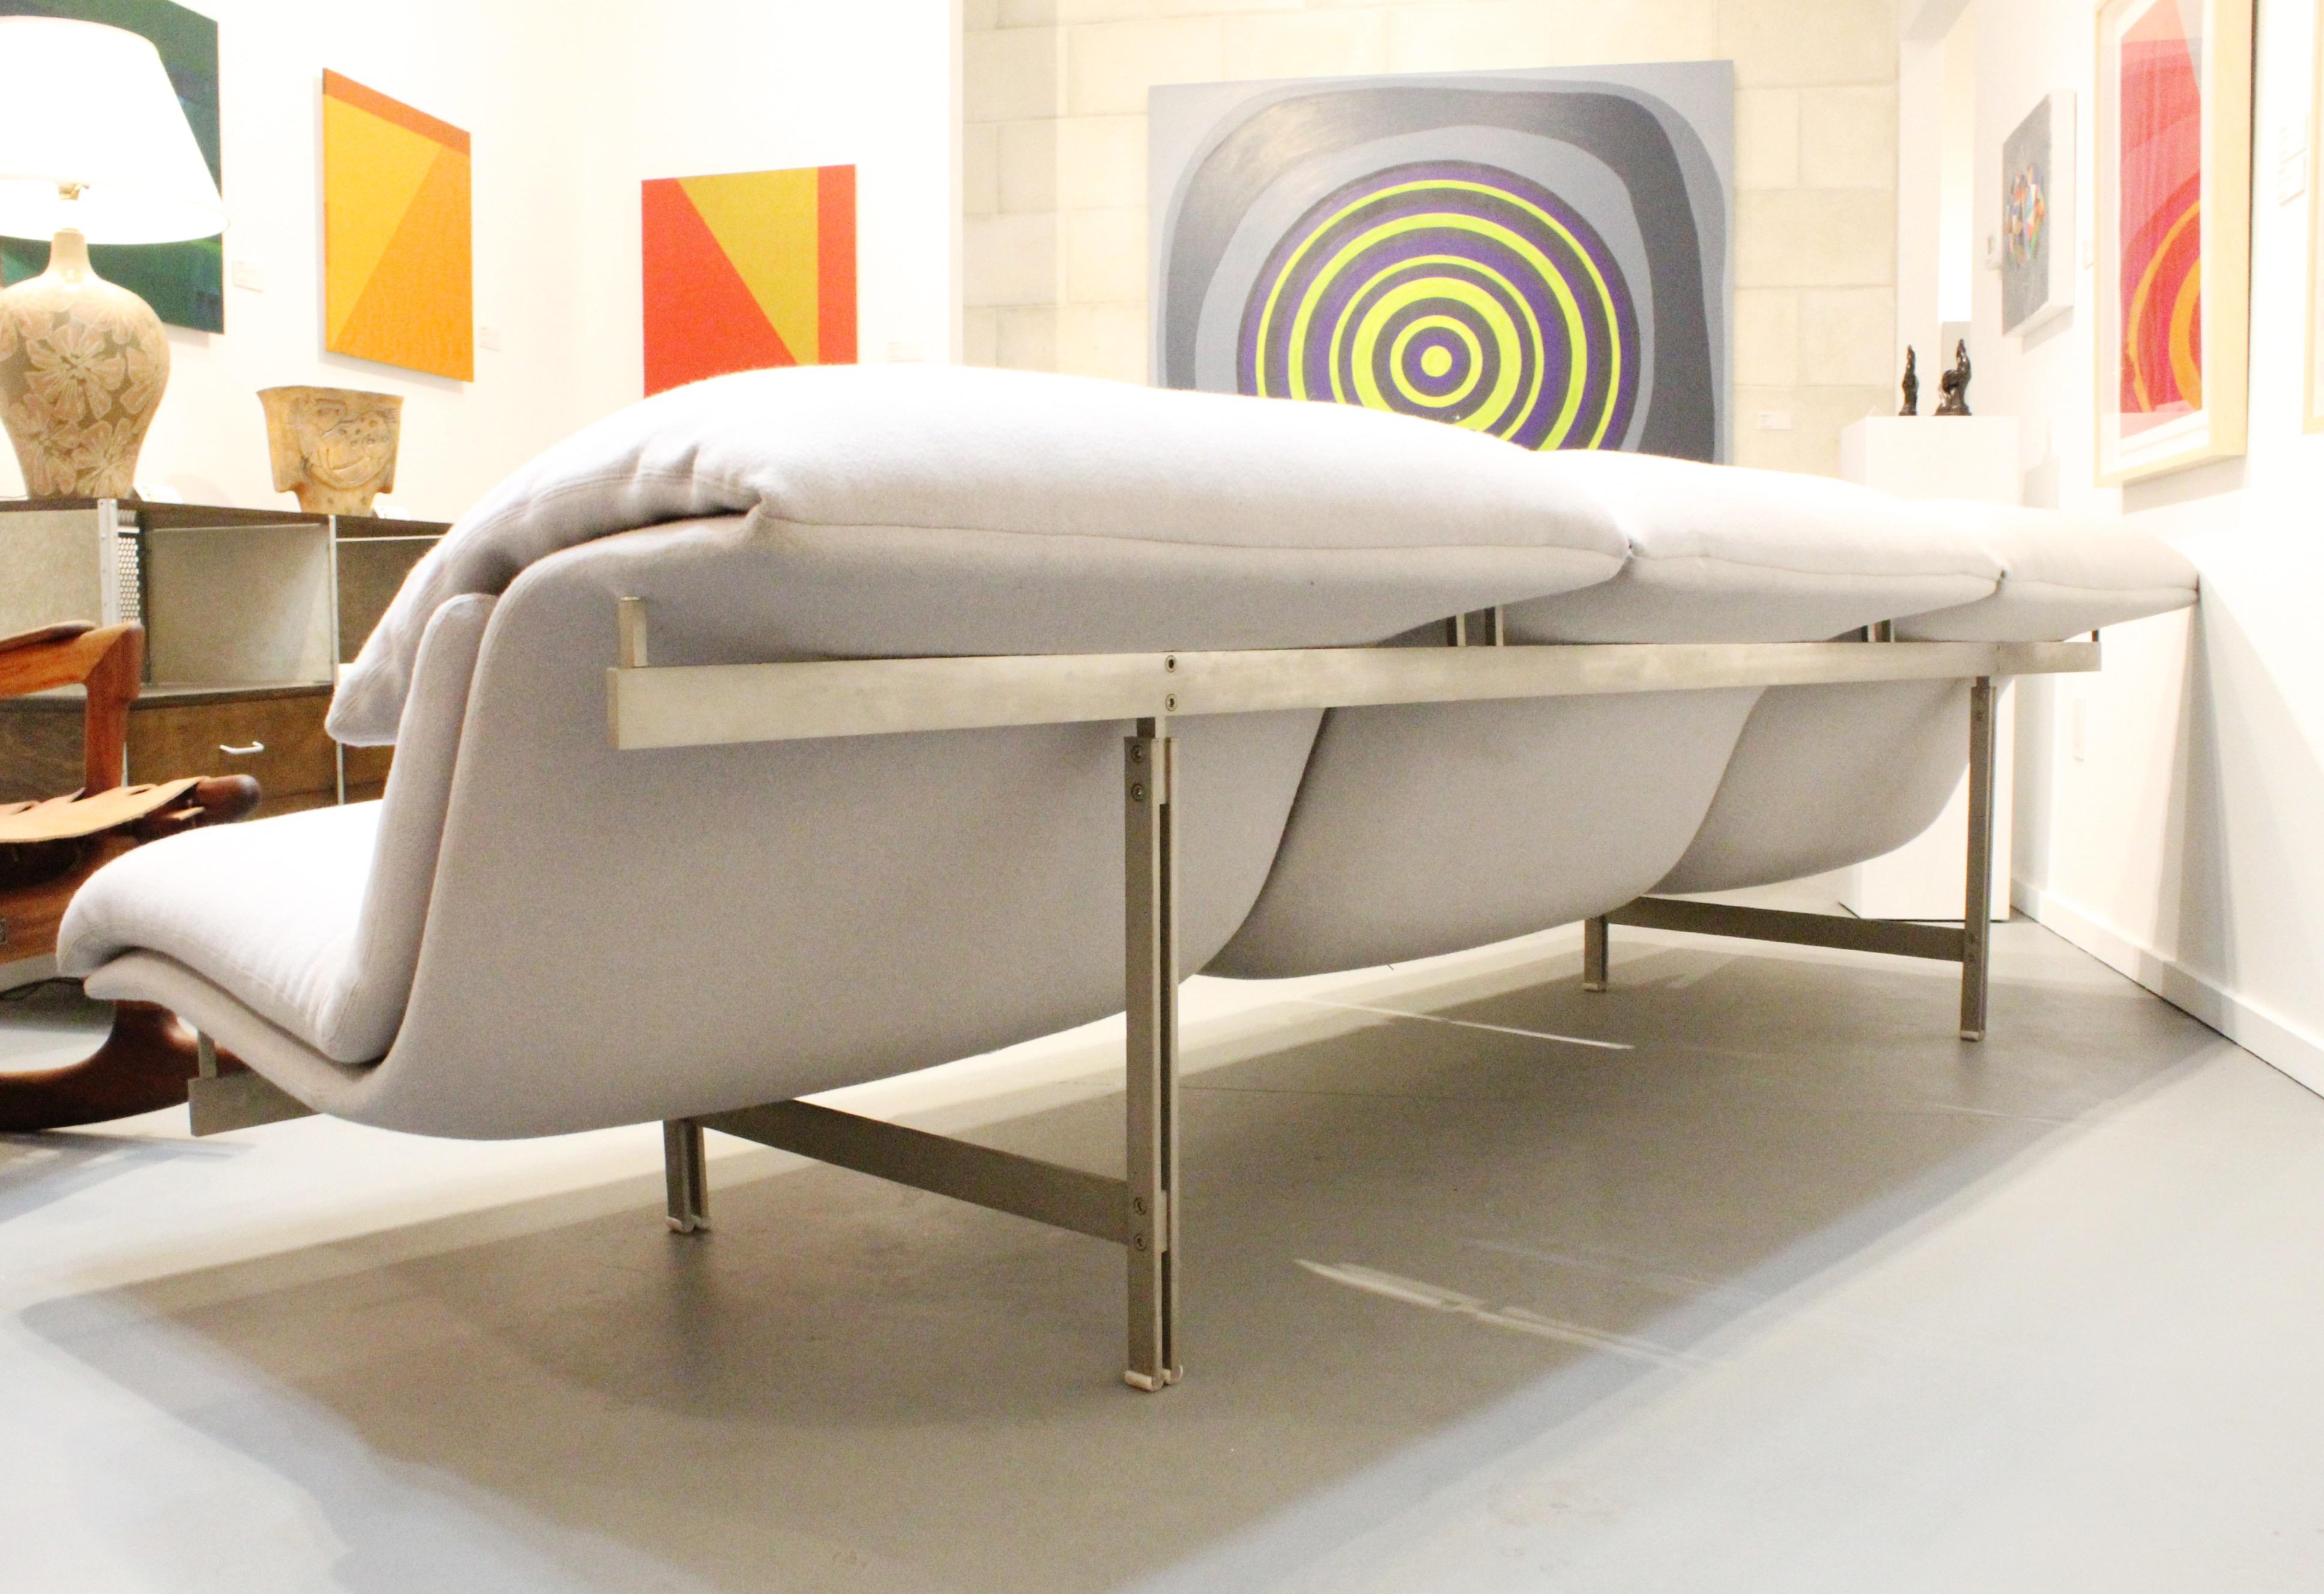 Incredible Wave sofa designed by Giovanni Offredi for Saporiti Italia. This model is a rare and hard to find large model which is 112 inches long as opposed to common 96 inch version. Sofa is in excellent vintage condition and has a beautiful light